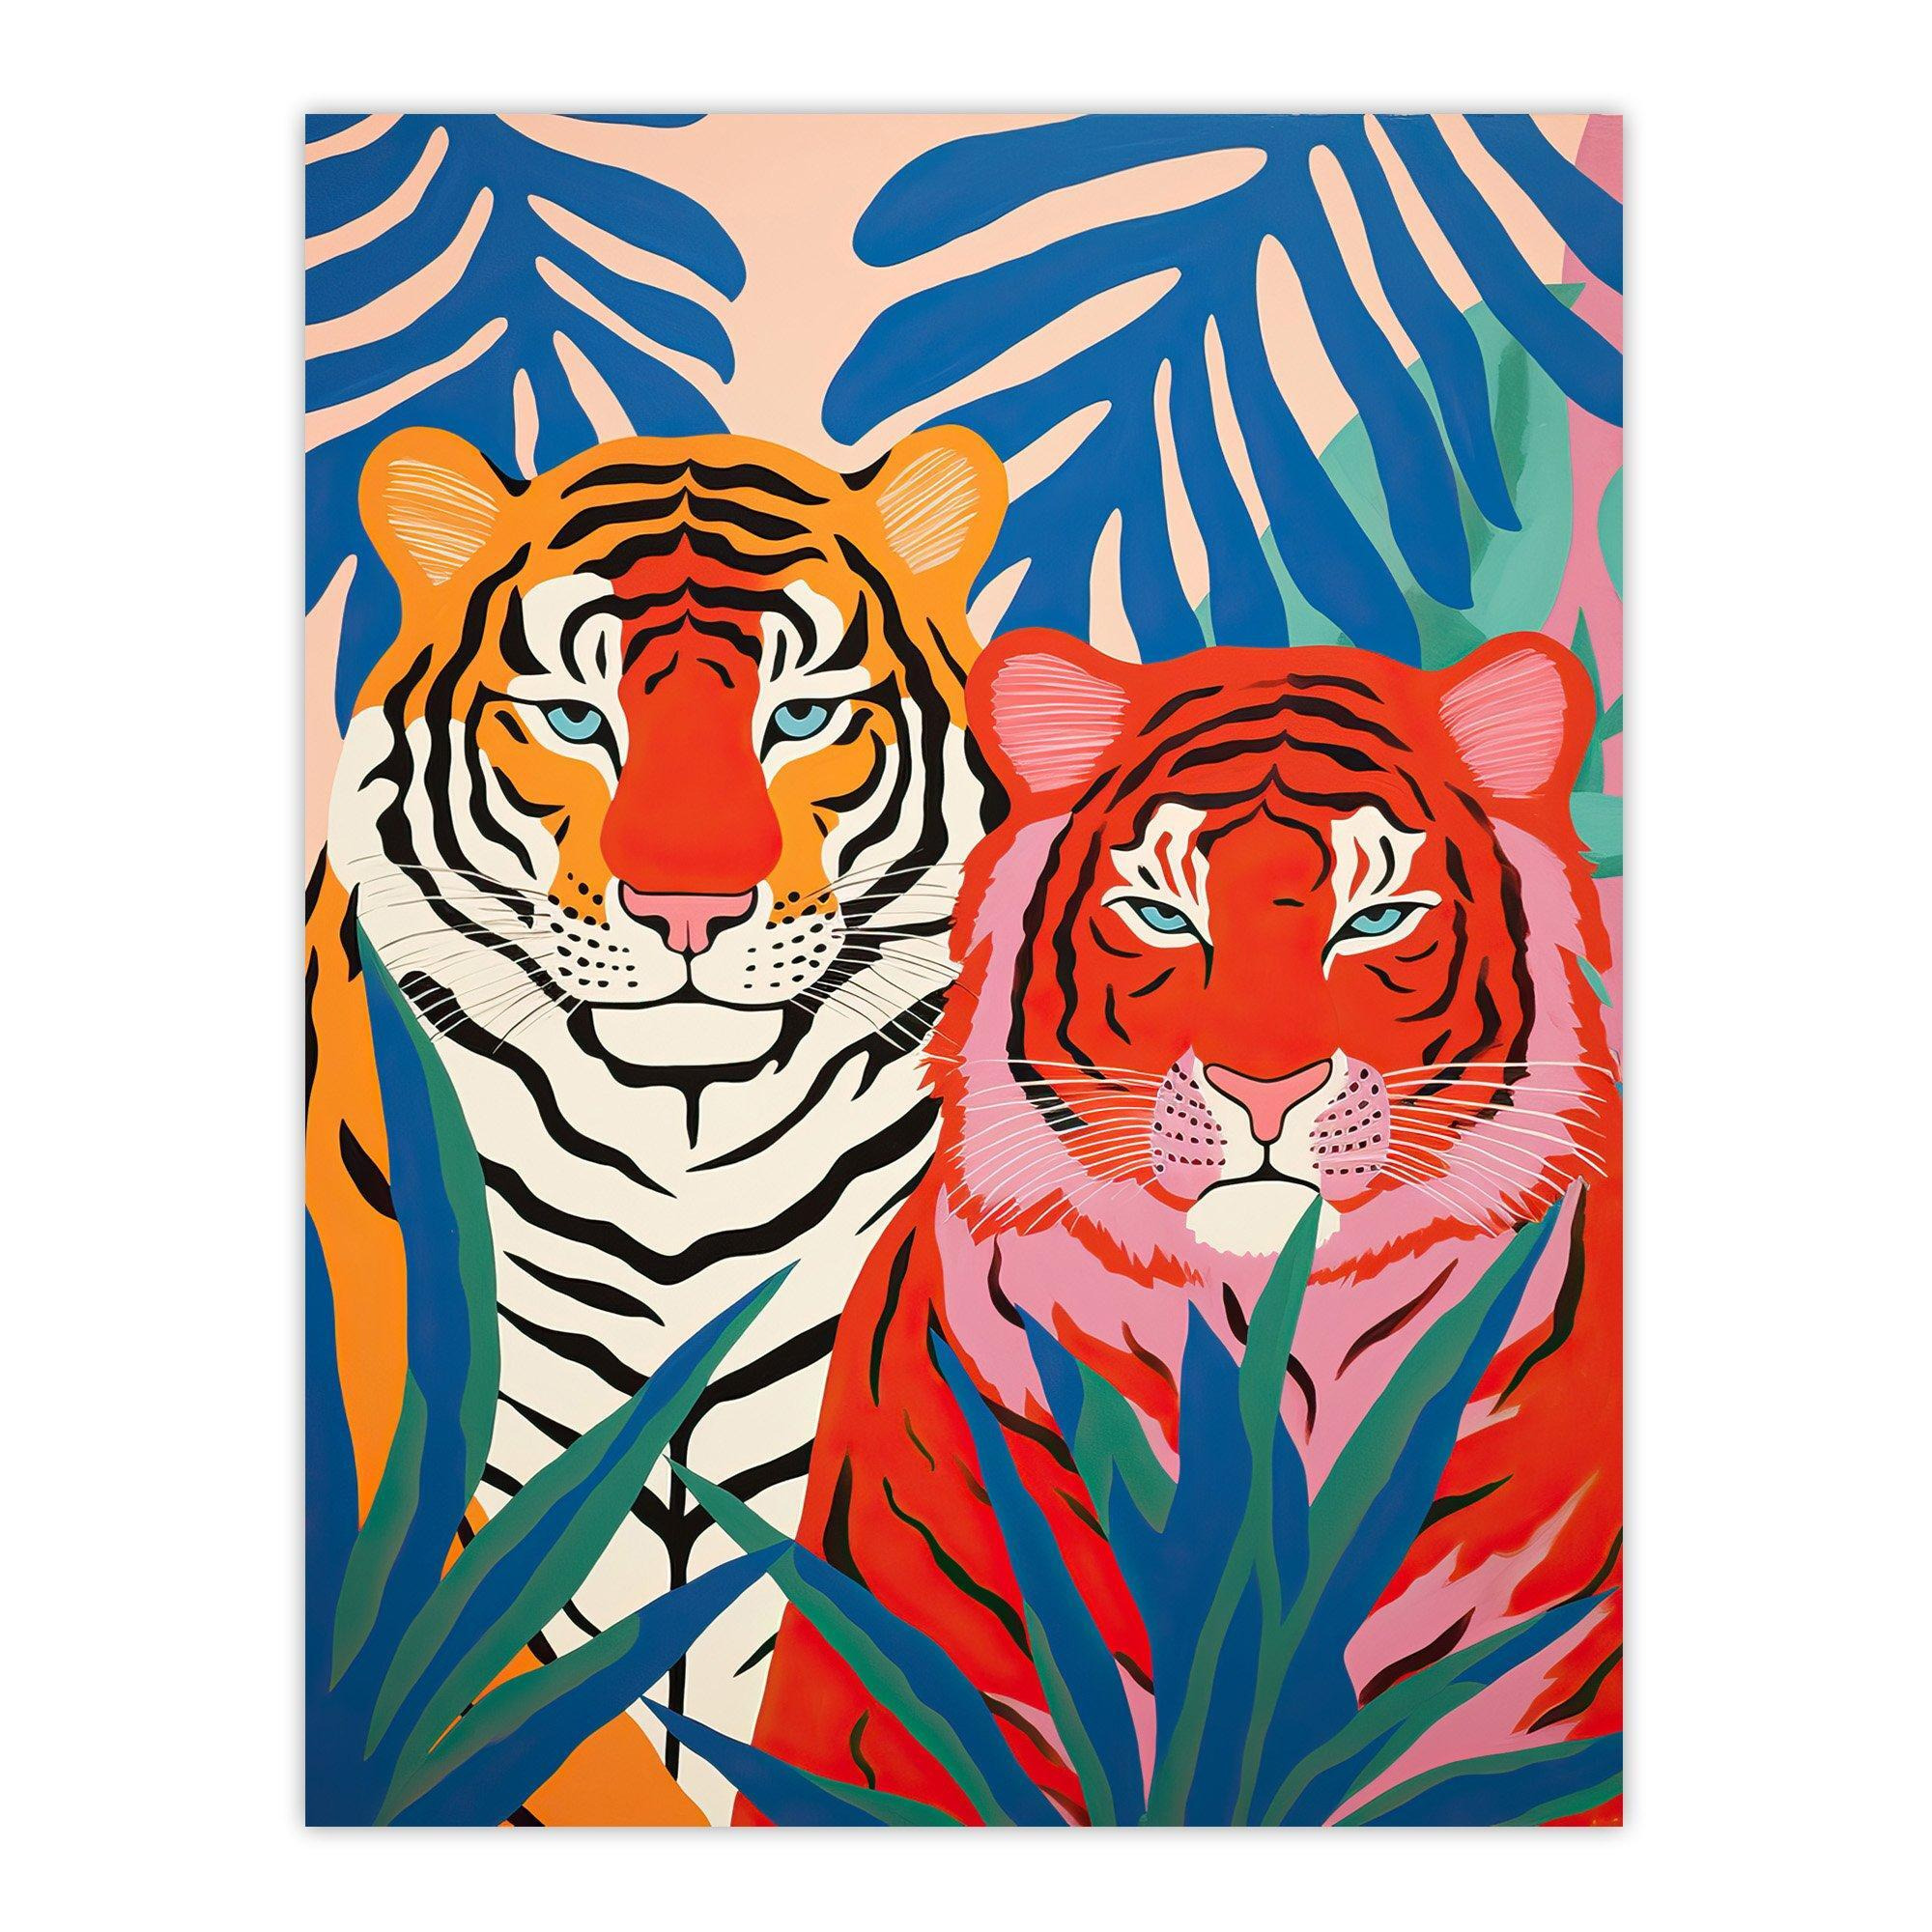 Wall Art Print Seeing Red Tigers Waiting to Pounce Behind Plants Bold Orange Blue Vibrant Painting Poster - image 1